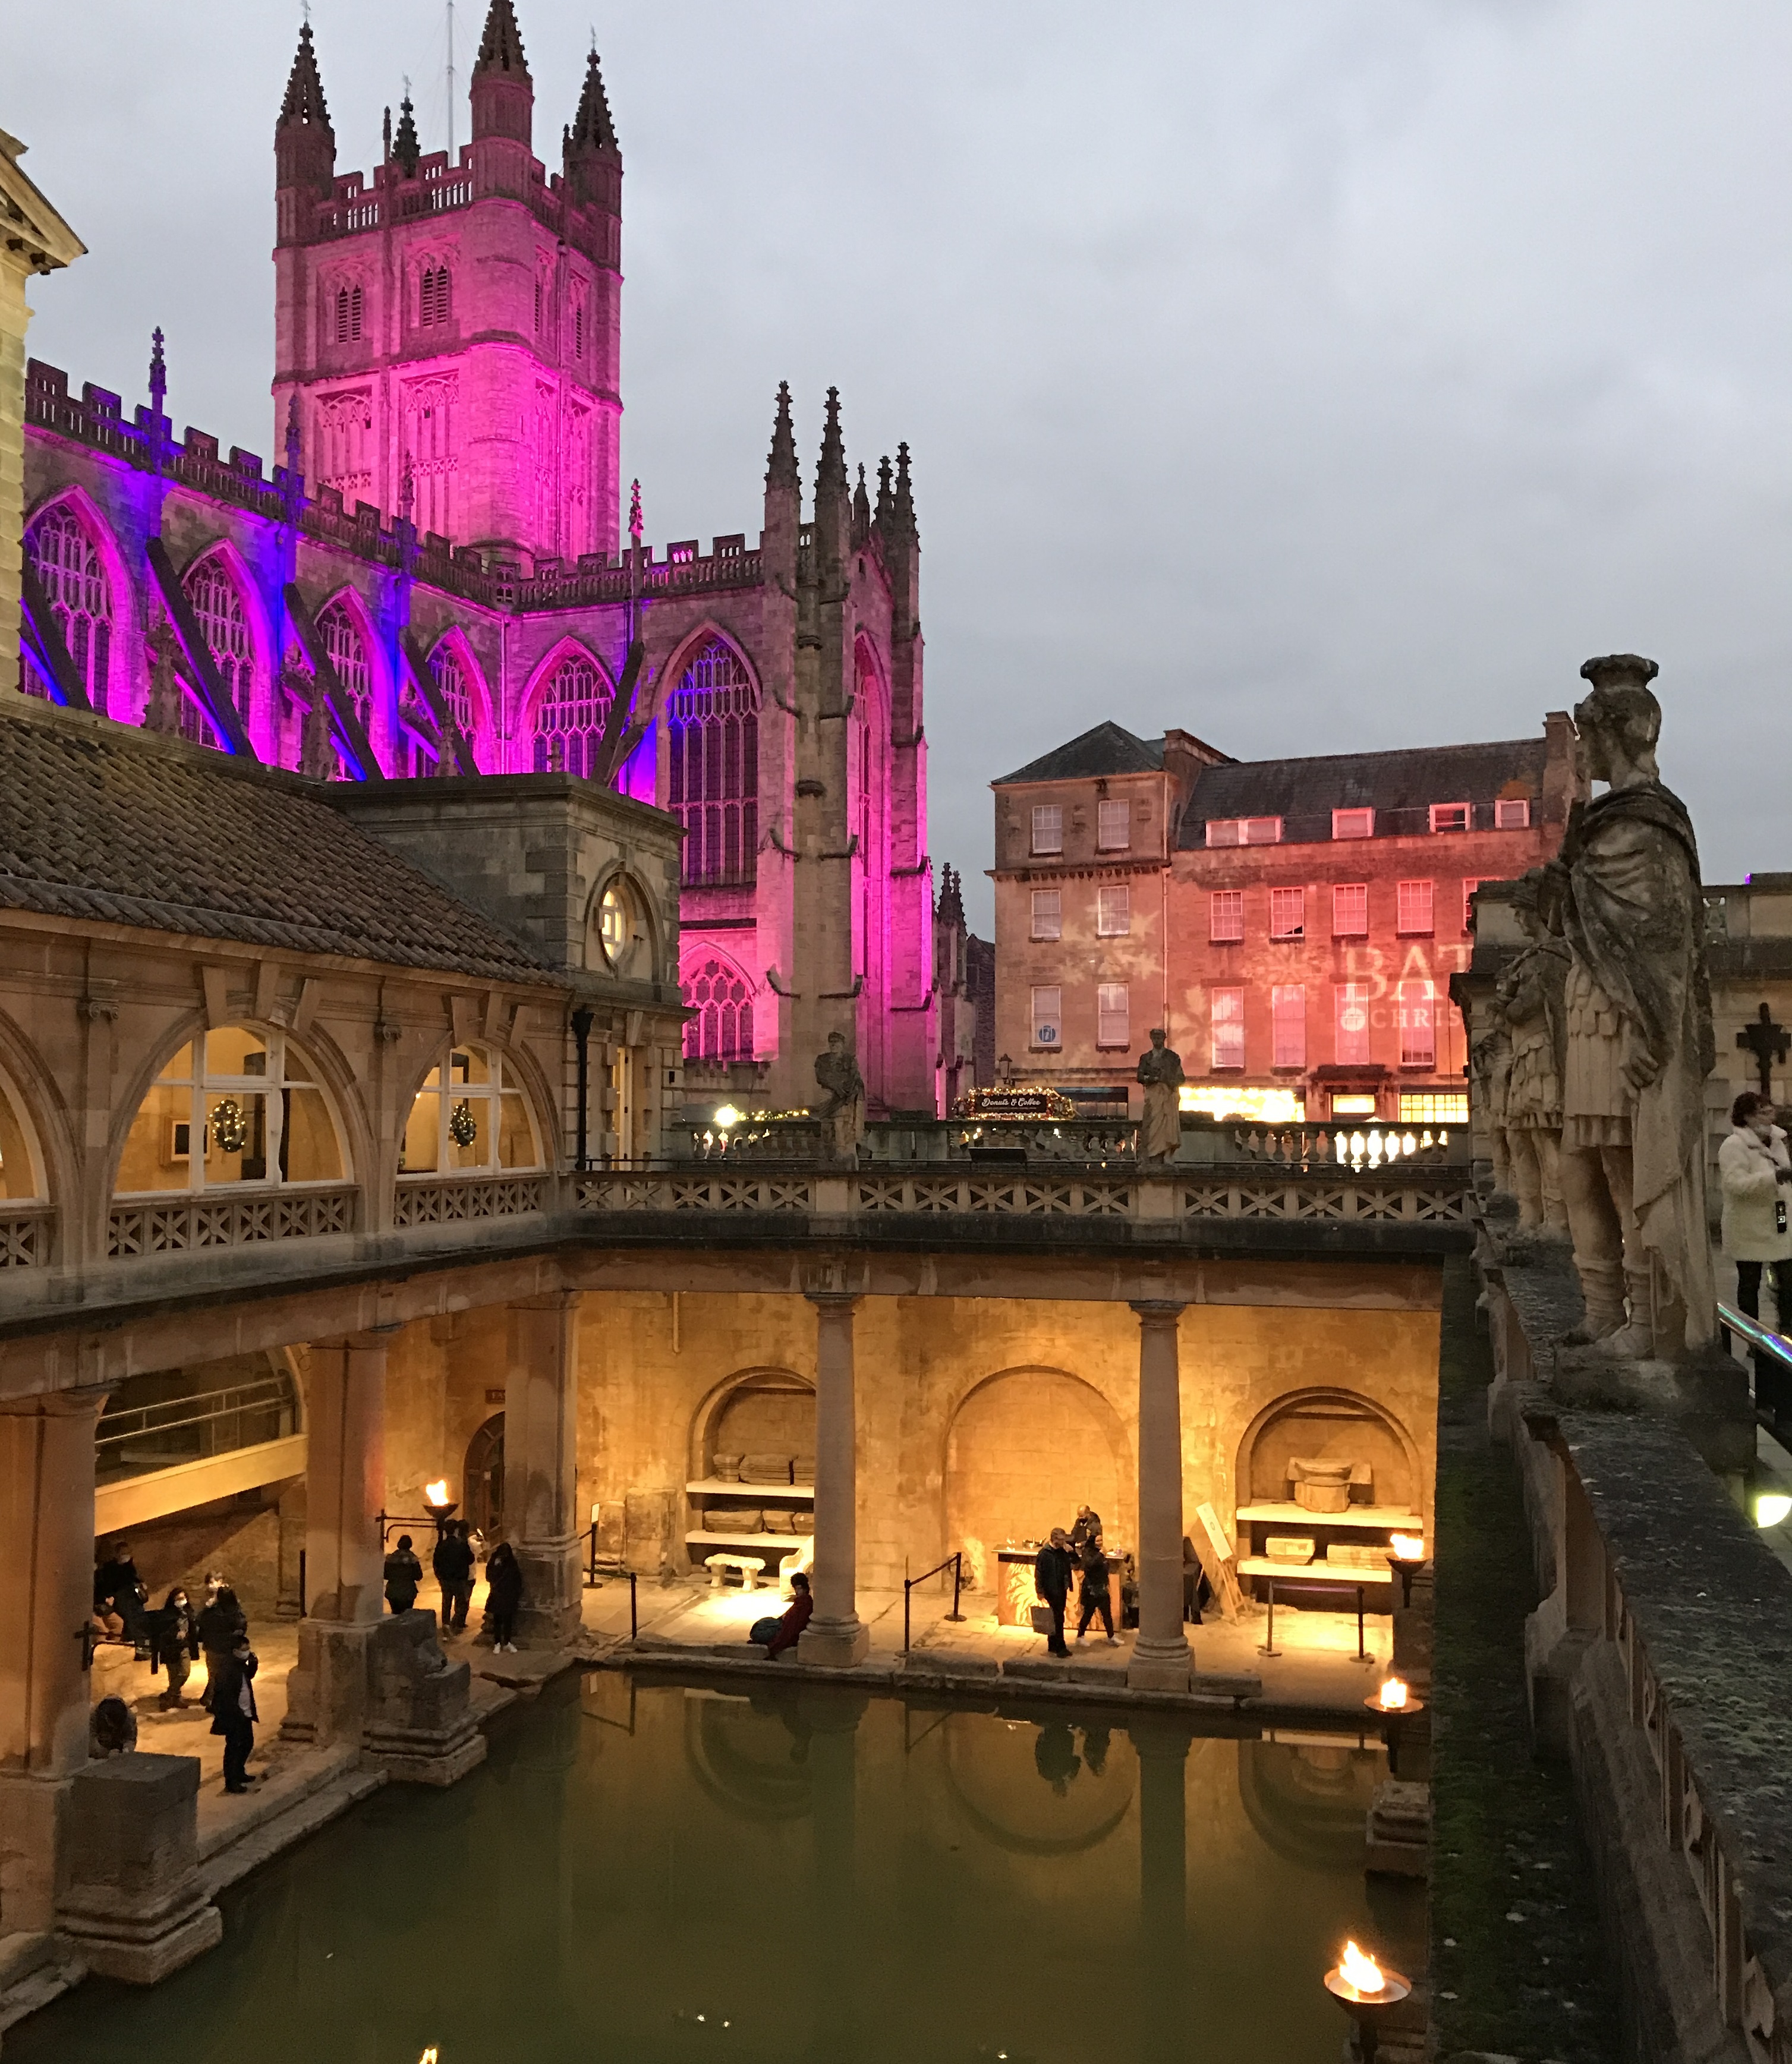 Image: The Roman Baths lit up in the evening